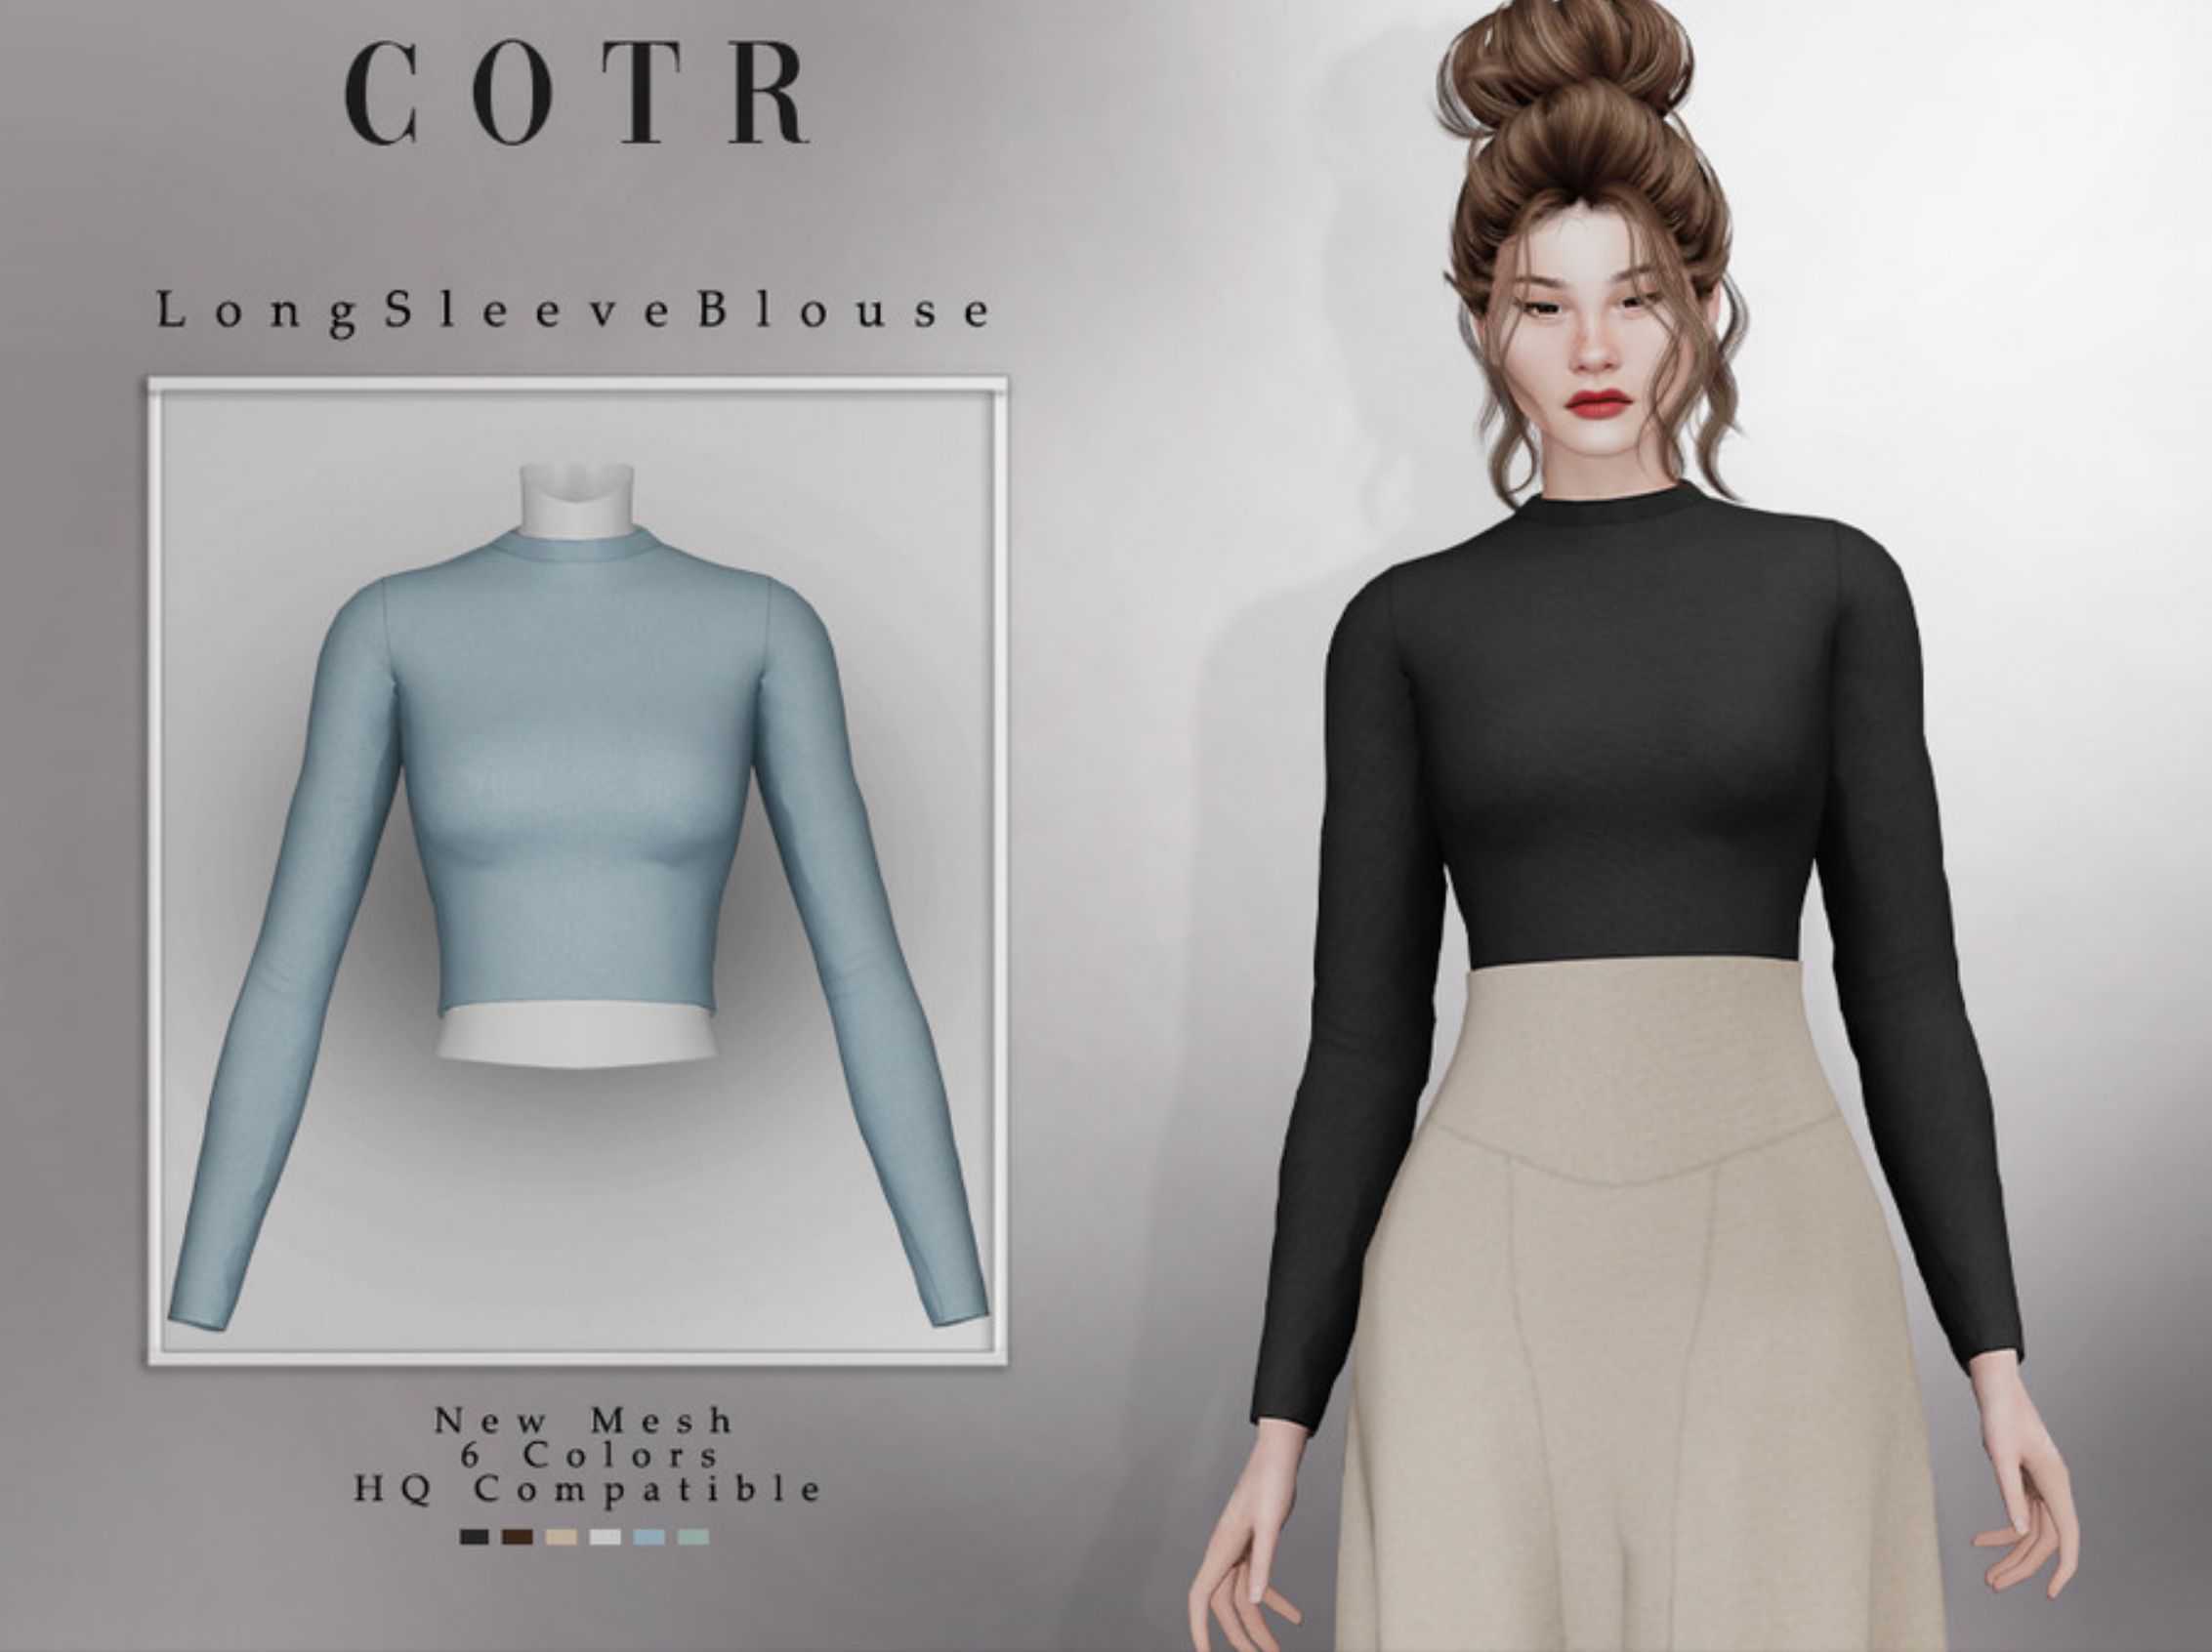 Long Sleeve Blouse - Sims 4 Mod Download Free